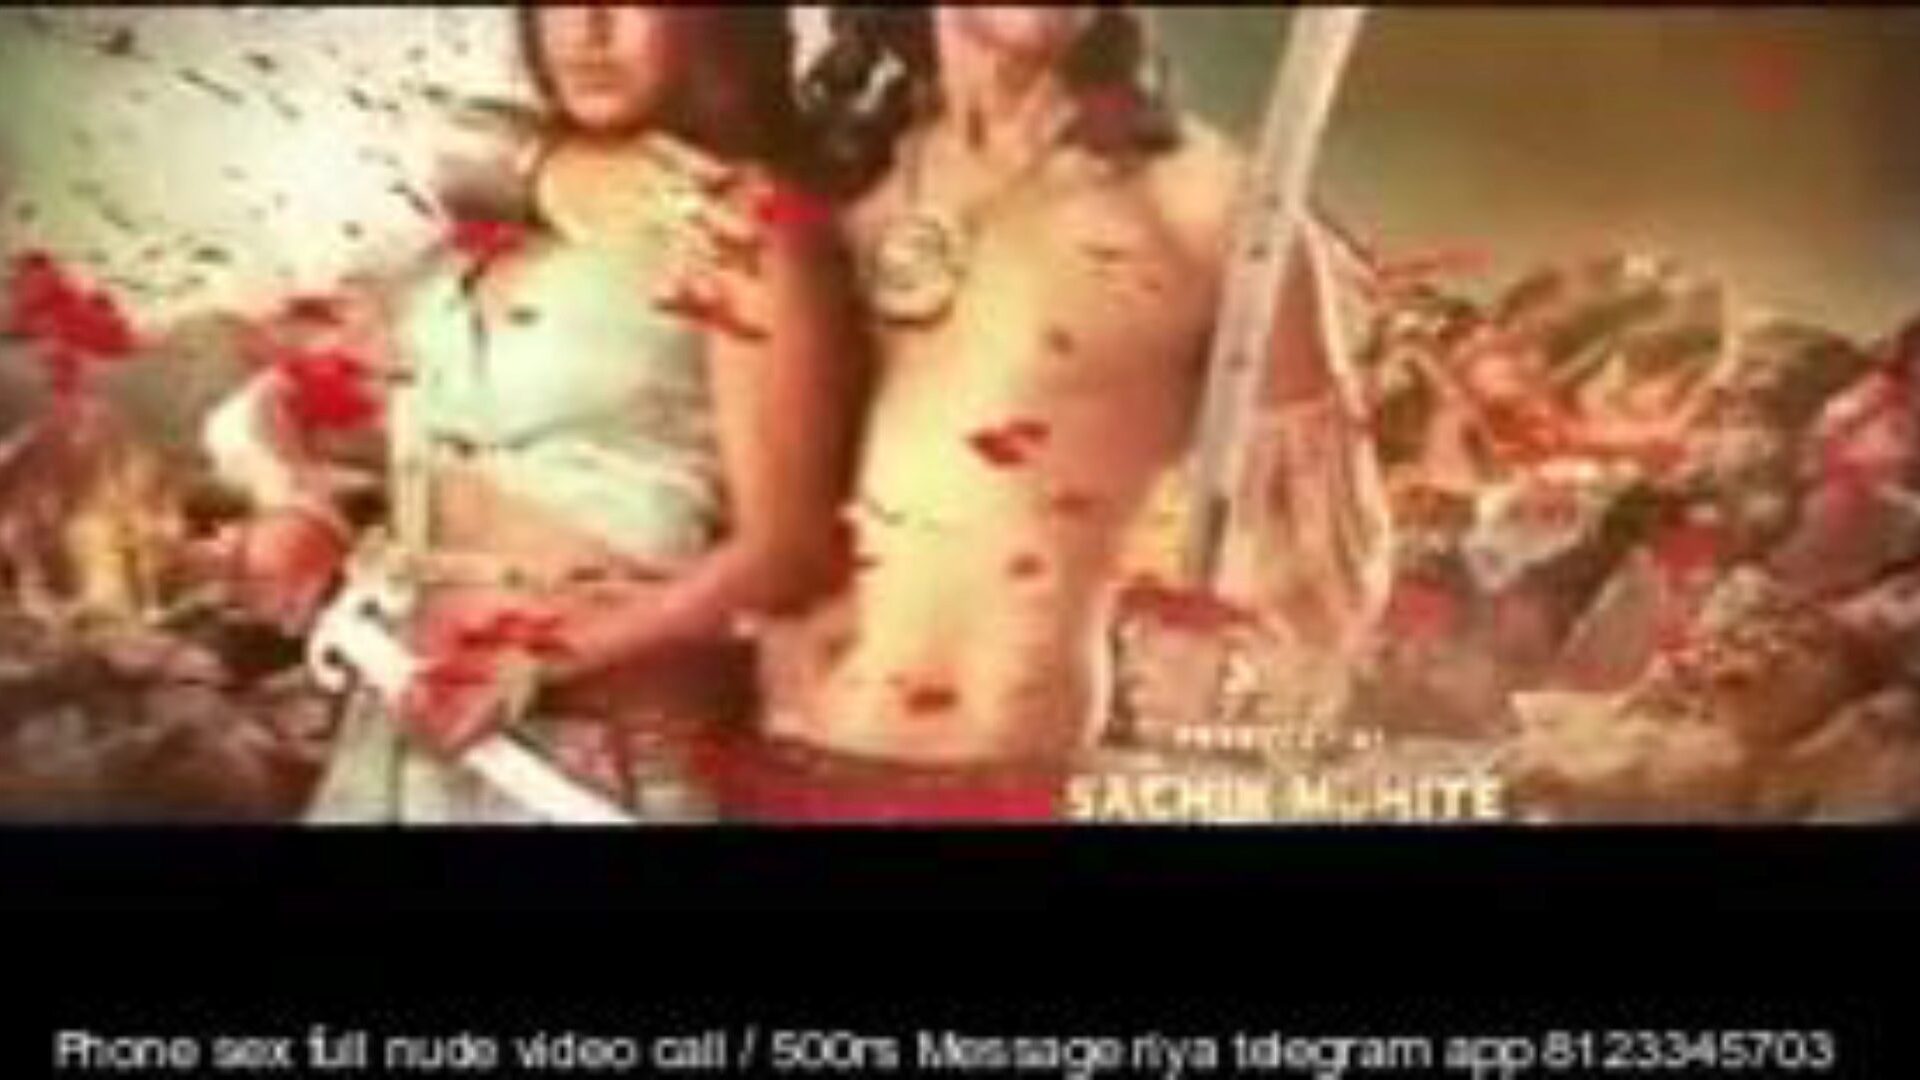 Paurashpur 2020 Hindi S01 Ep 01 to 07, Porn 1a: xHamster Watch Paurashpur 2020 Hindi S01 Ep 01 to 07 clip on xHamster, the best sex tube web resource with tons of free-for-all Indian Hindi Pornhub & Mobile Hindi porno movies